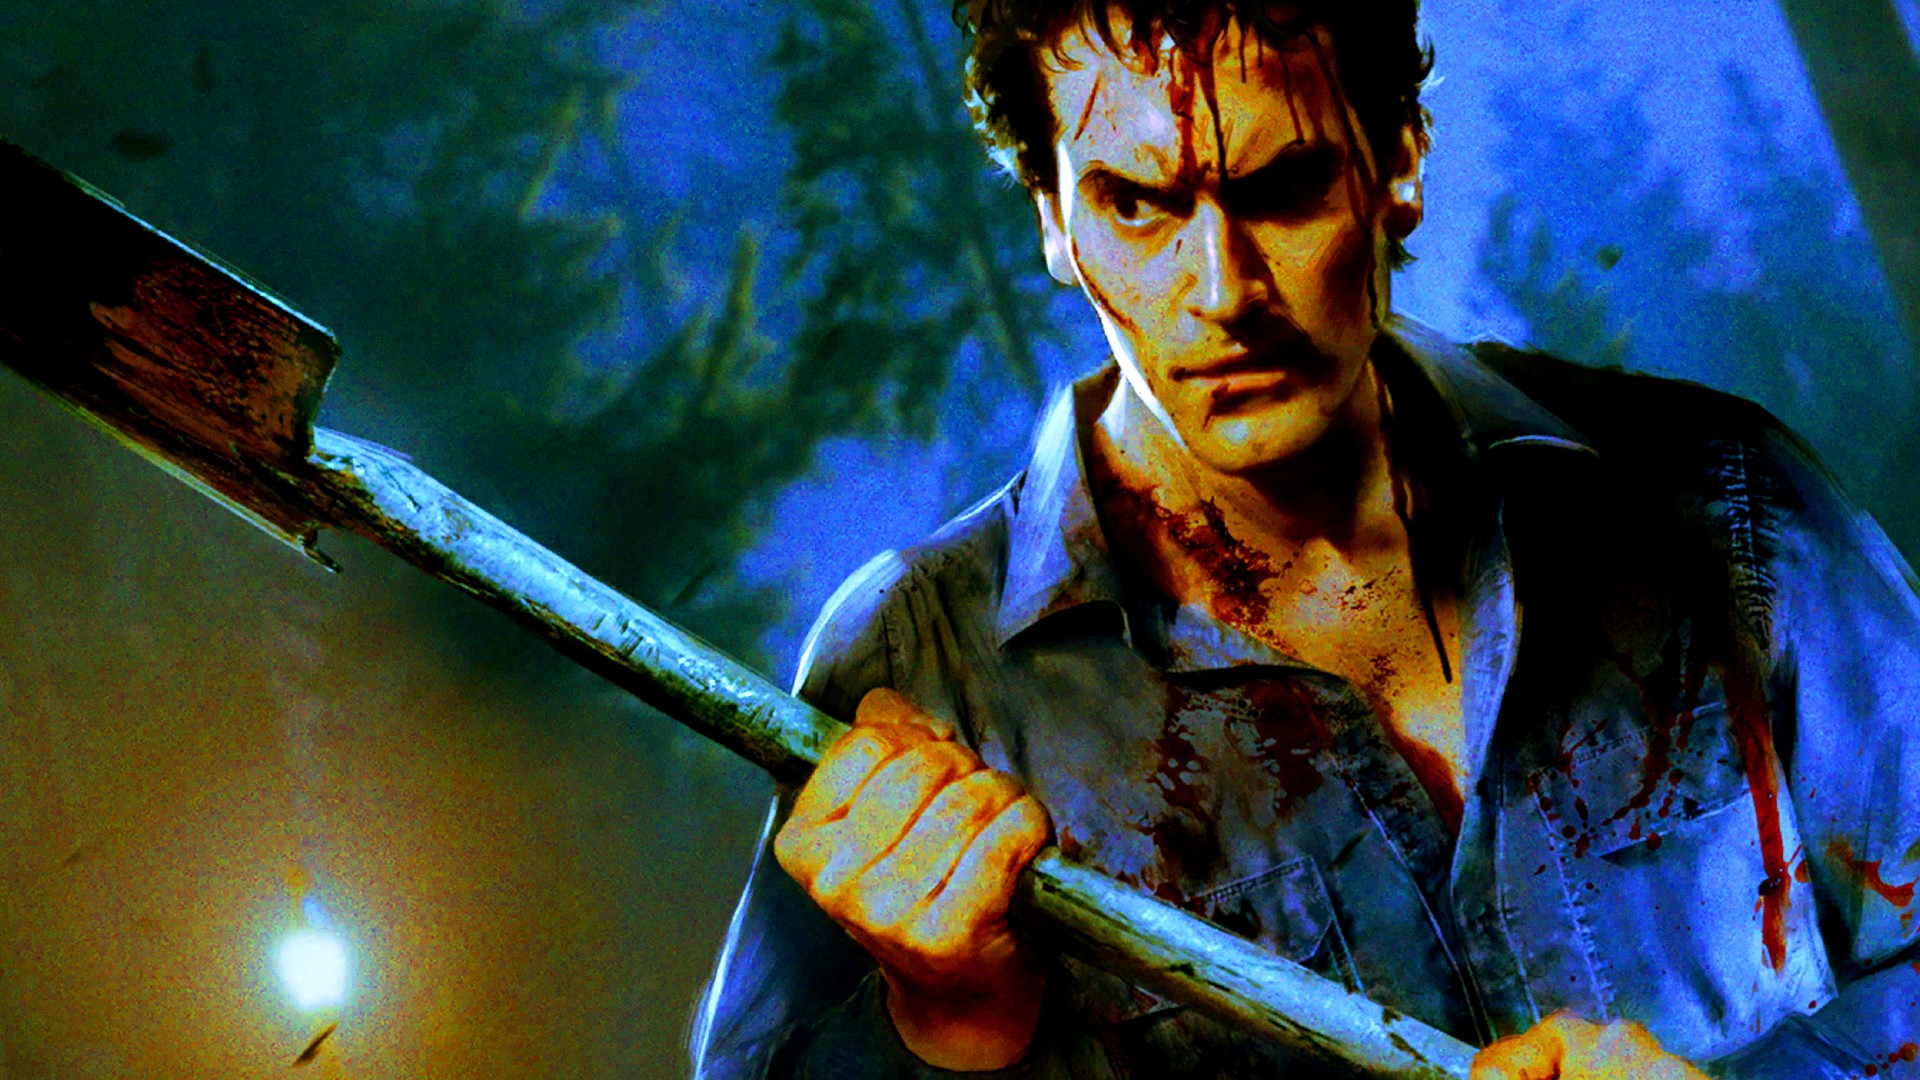 Evil Dead The Game update introduces free Army of Darkness map